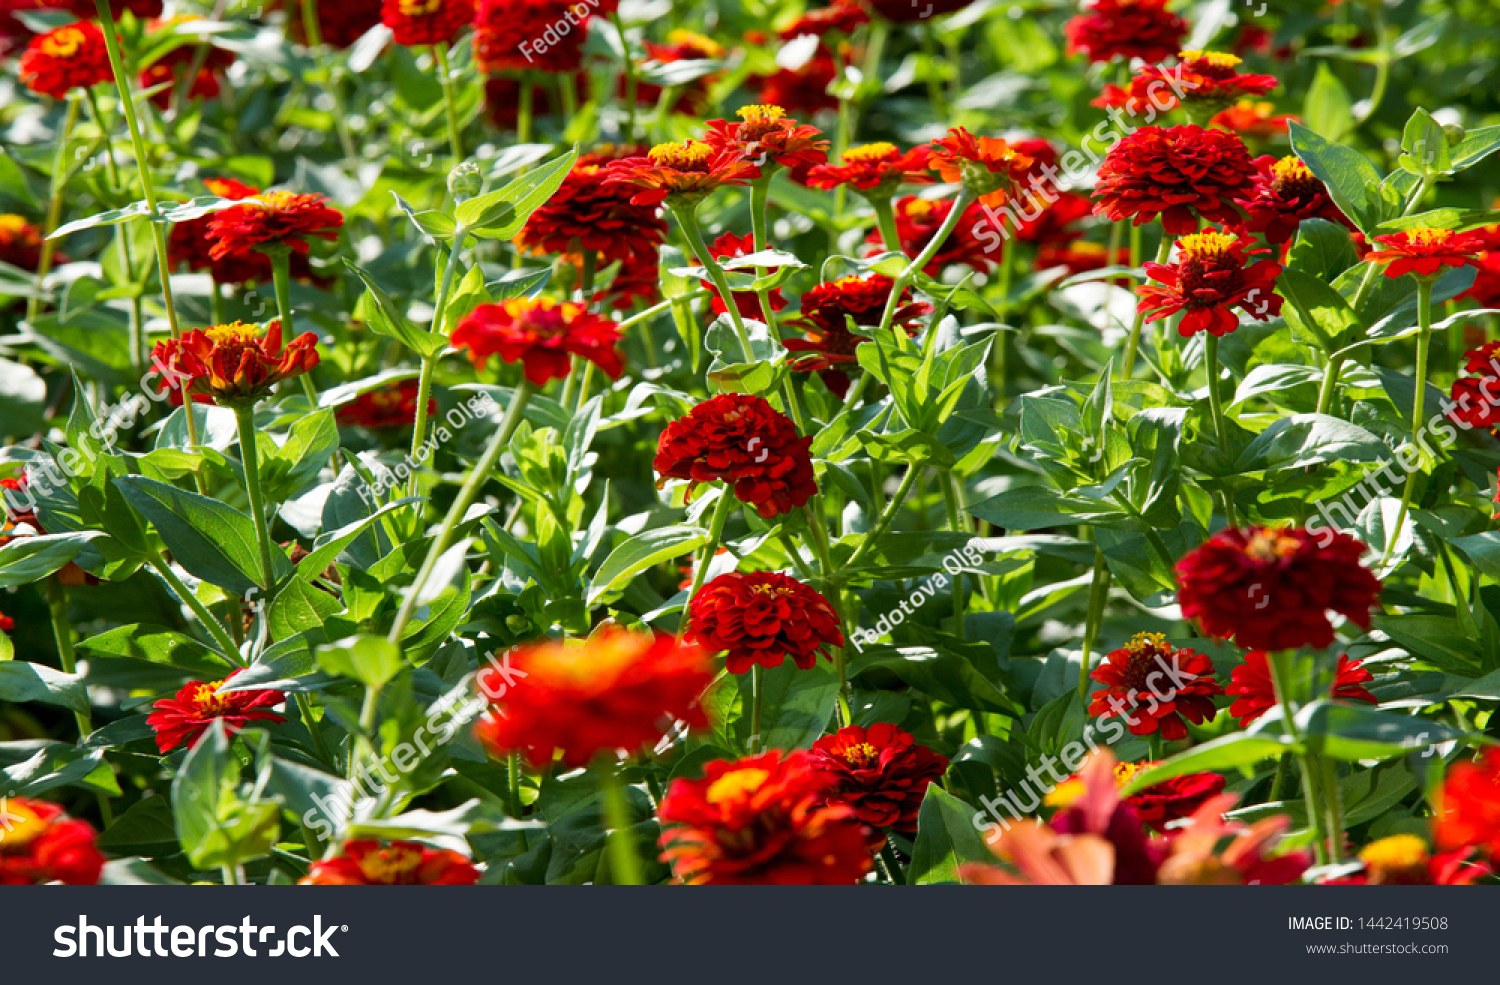 Zinnias are annual plants, shrubs and sub-shrubs growing mainly in North America, Zinnias can be white, greenish yellow, yellow, orange, red, purple or lilac. #1442419508